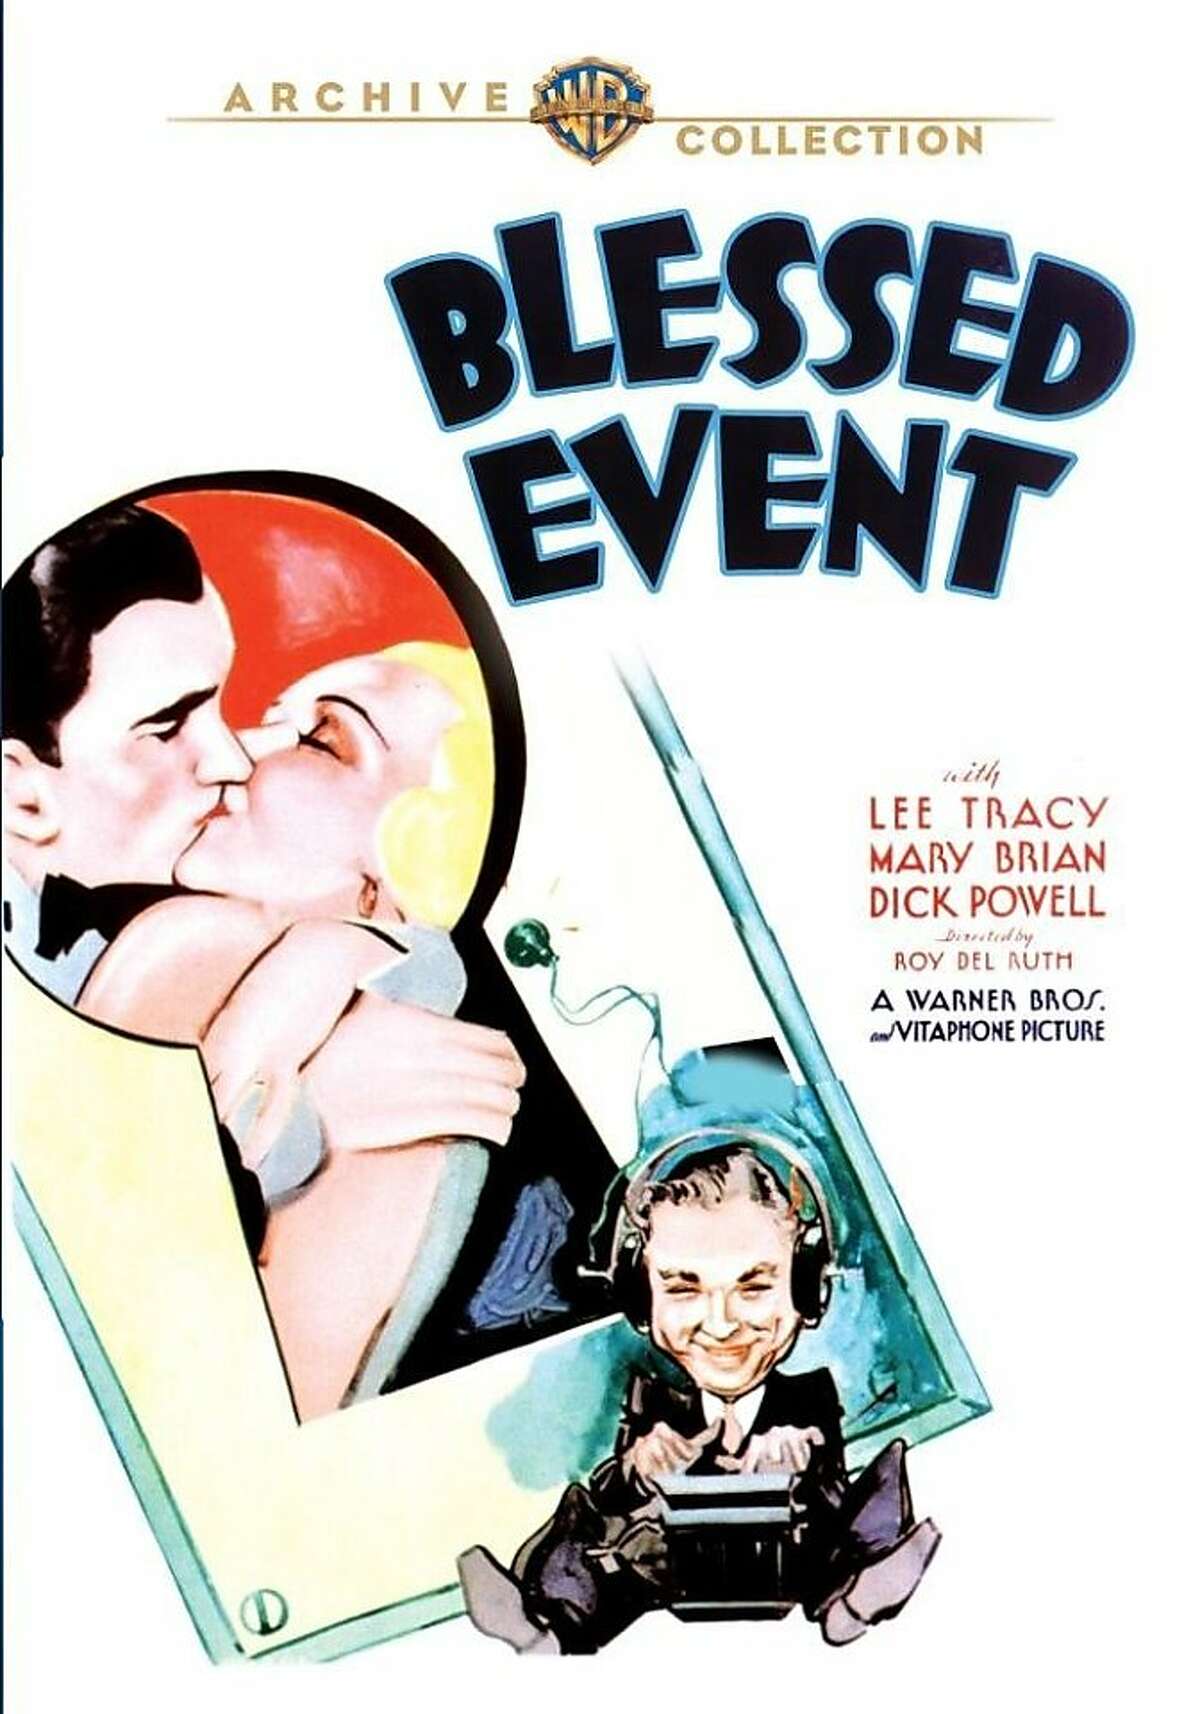 DVD cover: "Blessed Event," starring Lee Tracy